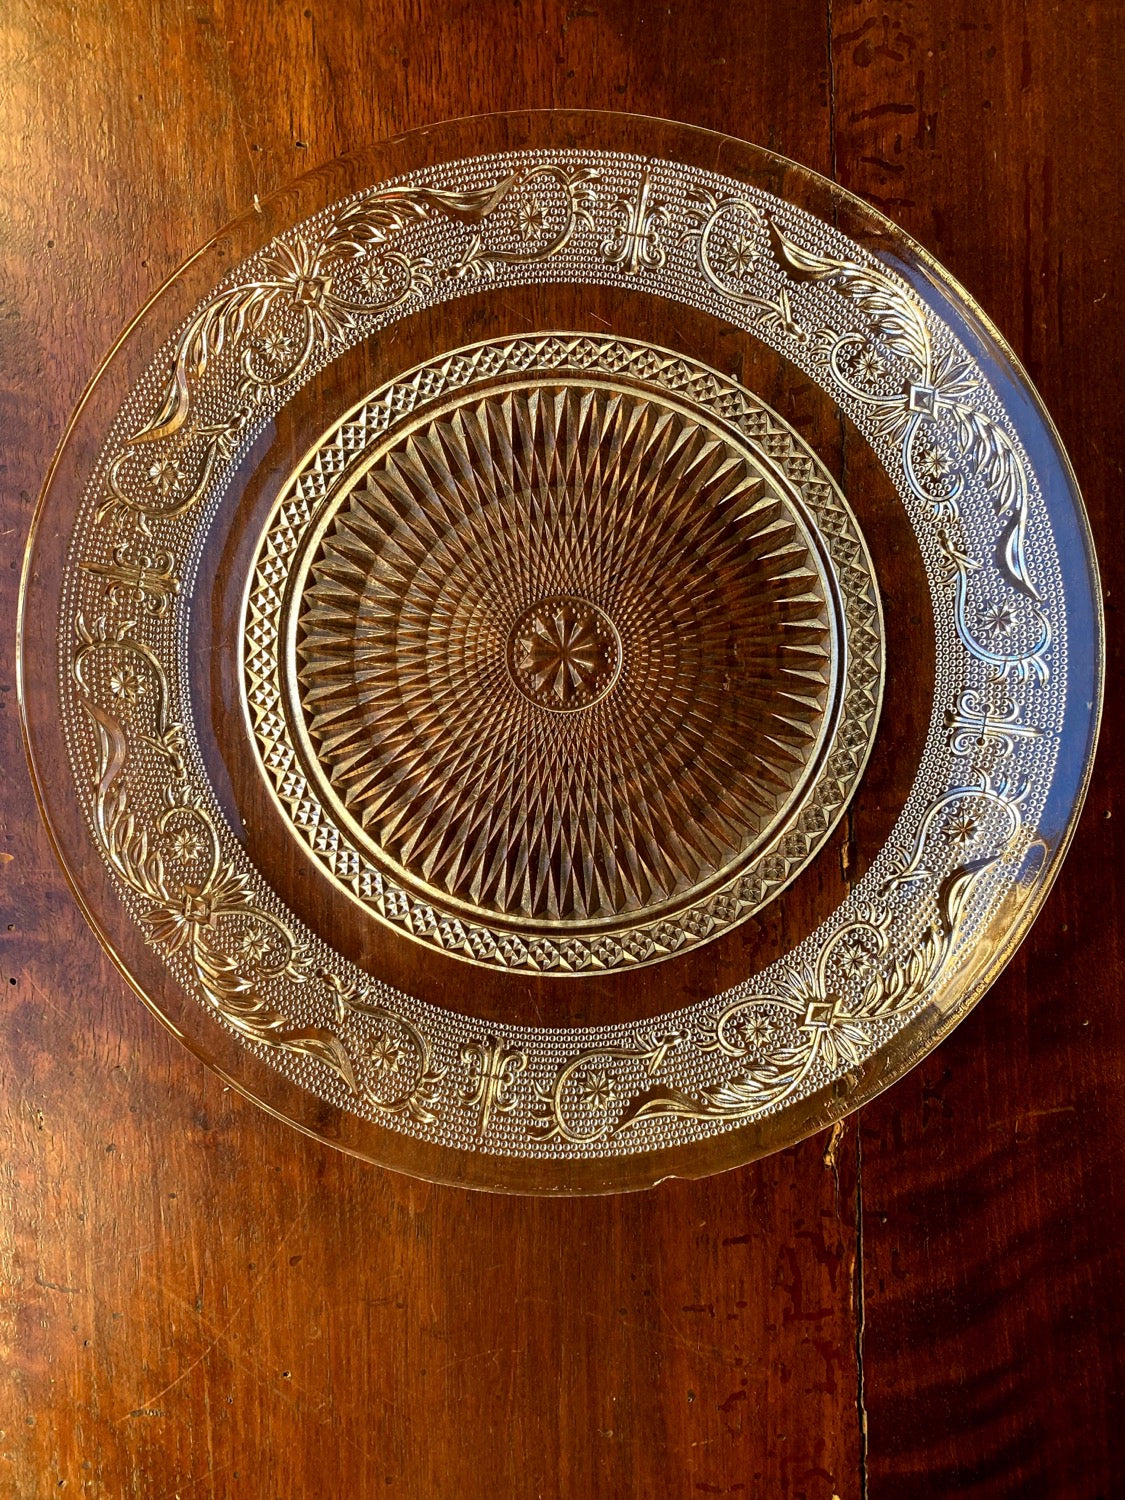 Decorated glass plate